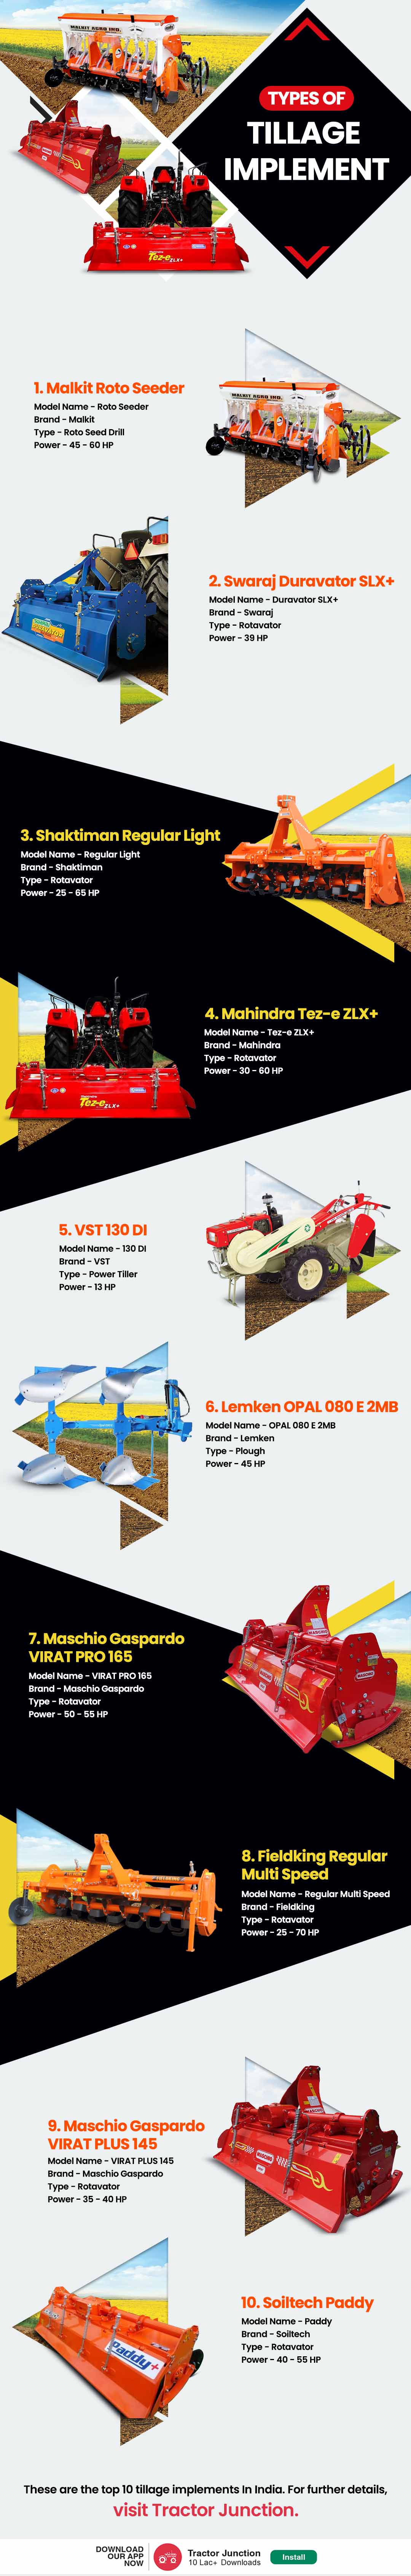 Types of Tillage Implements - Primary & Secondary Tillage Equipment